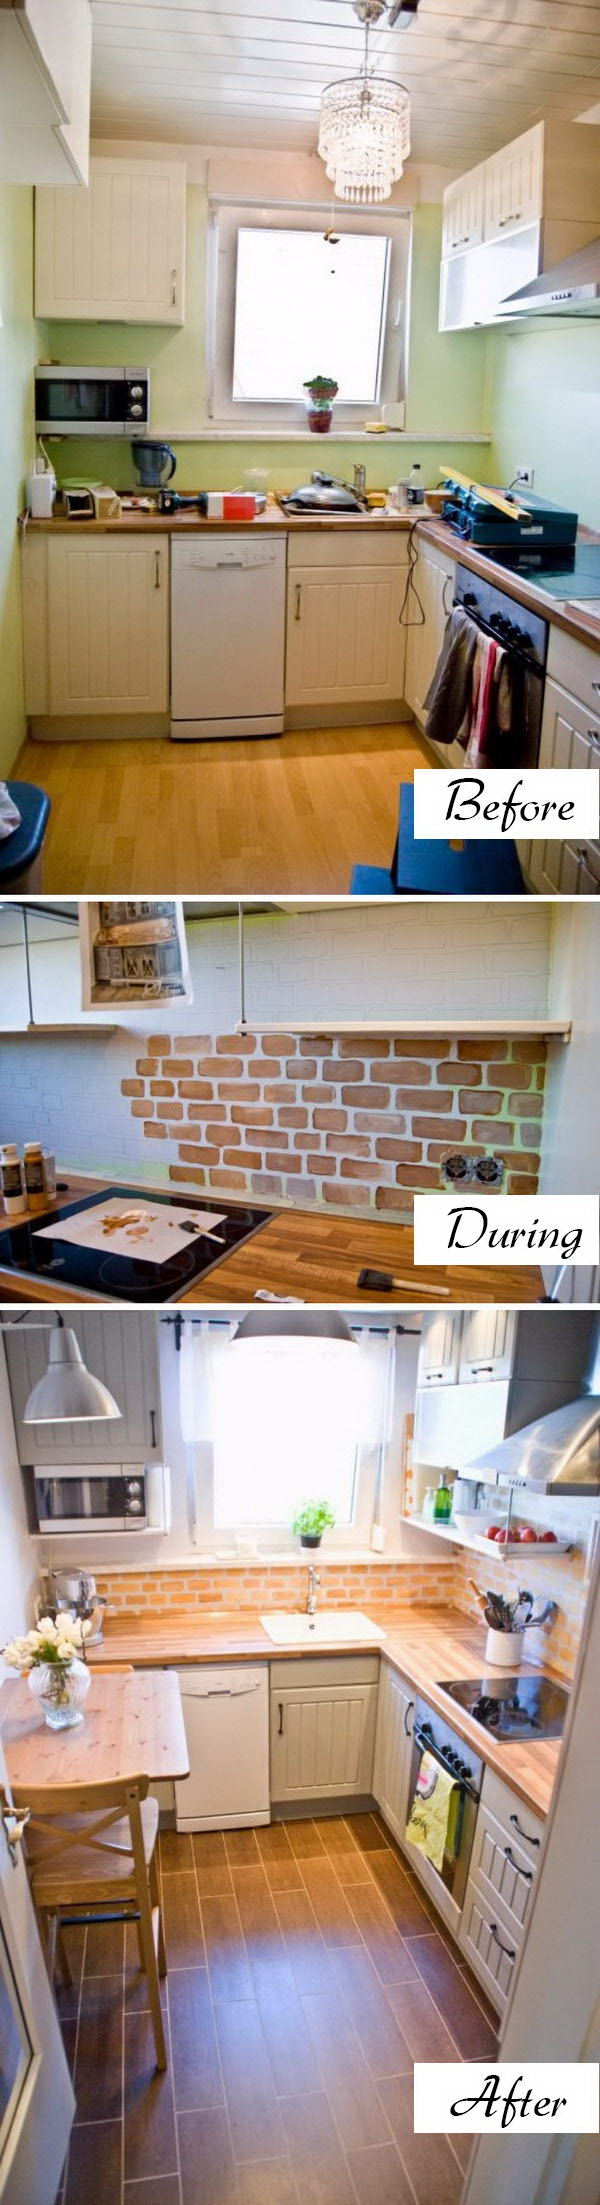 Change the look and save money with Faux Painted Brick Backsplash. 